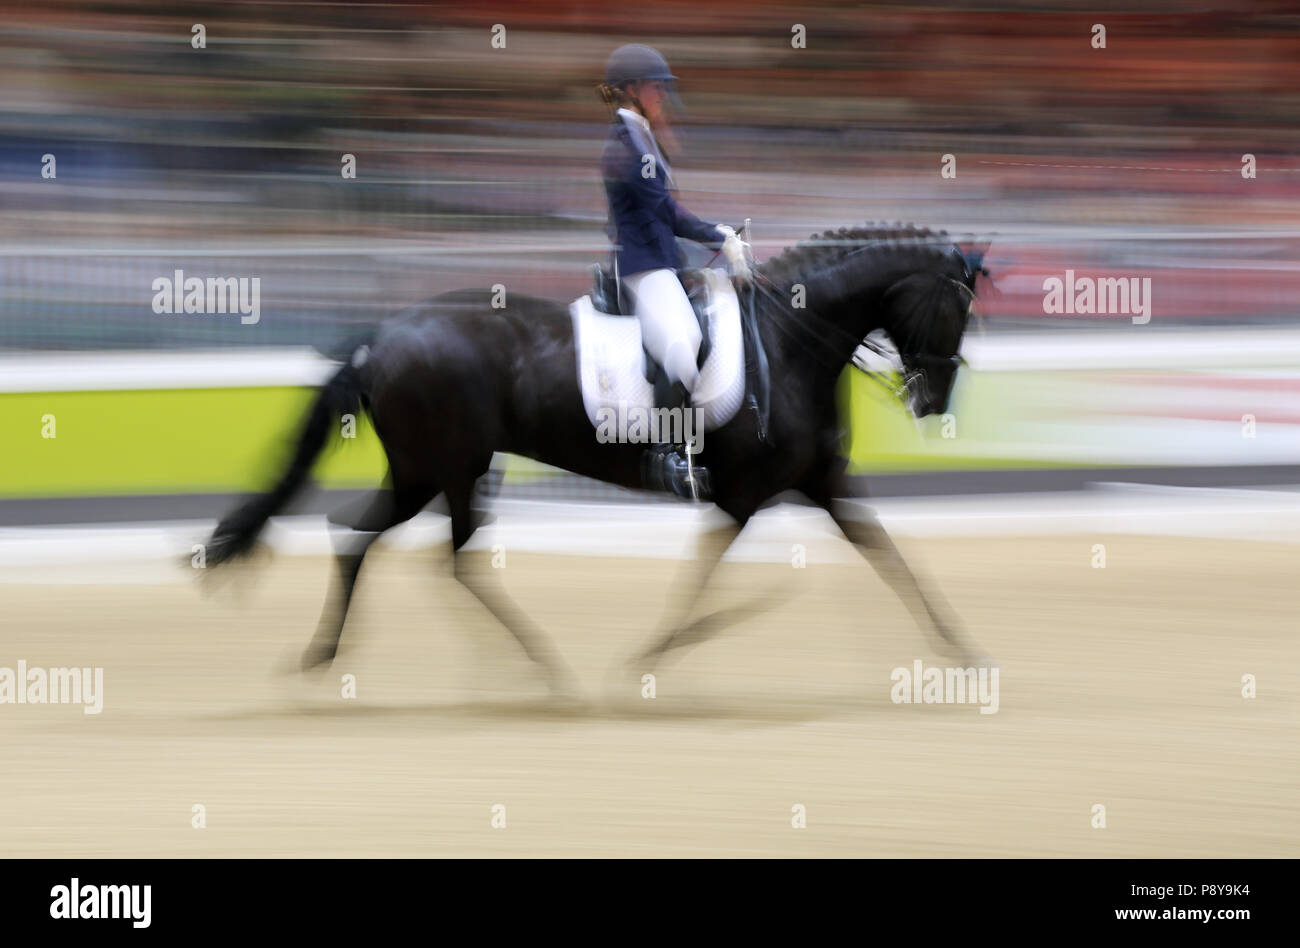 Berlin, dynamics, dressage rider and horse in strong trot Stock Photo